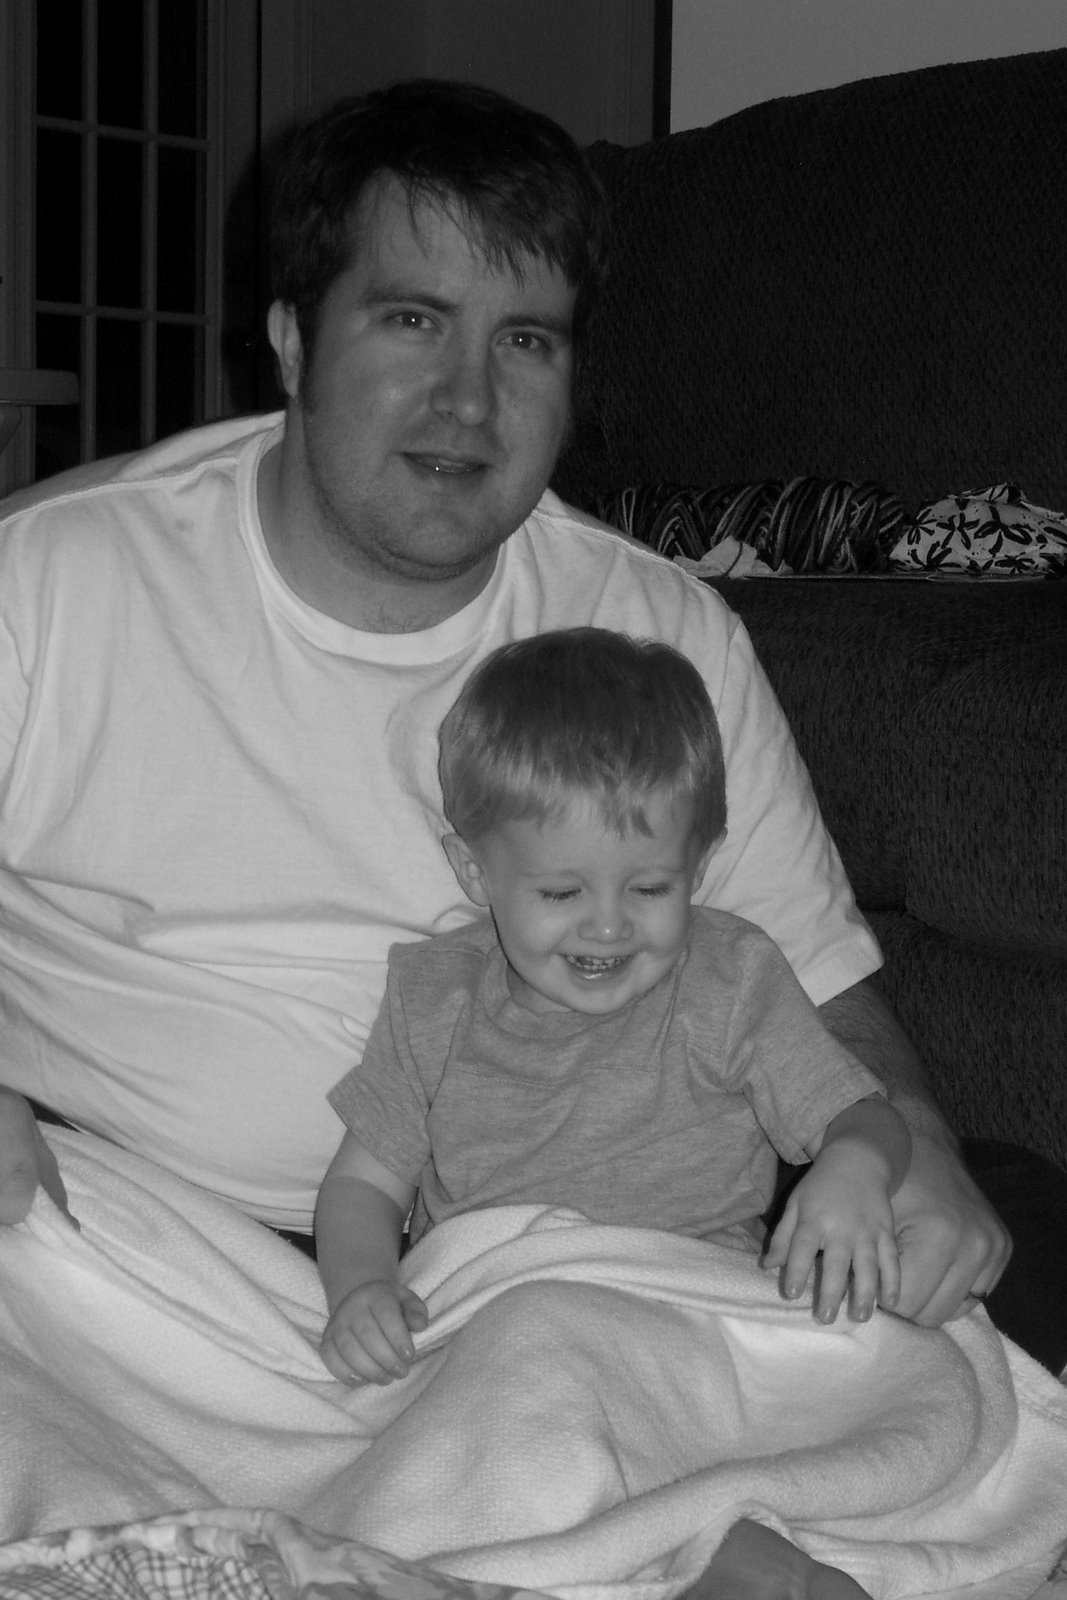 [Kyle+and+Daddy+in+B&W.jpg]